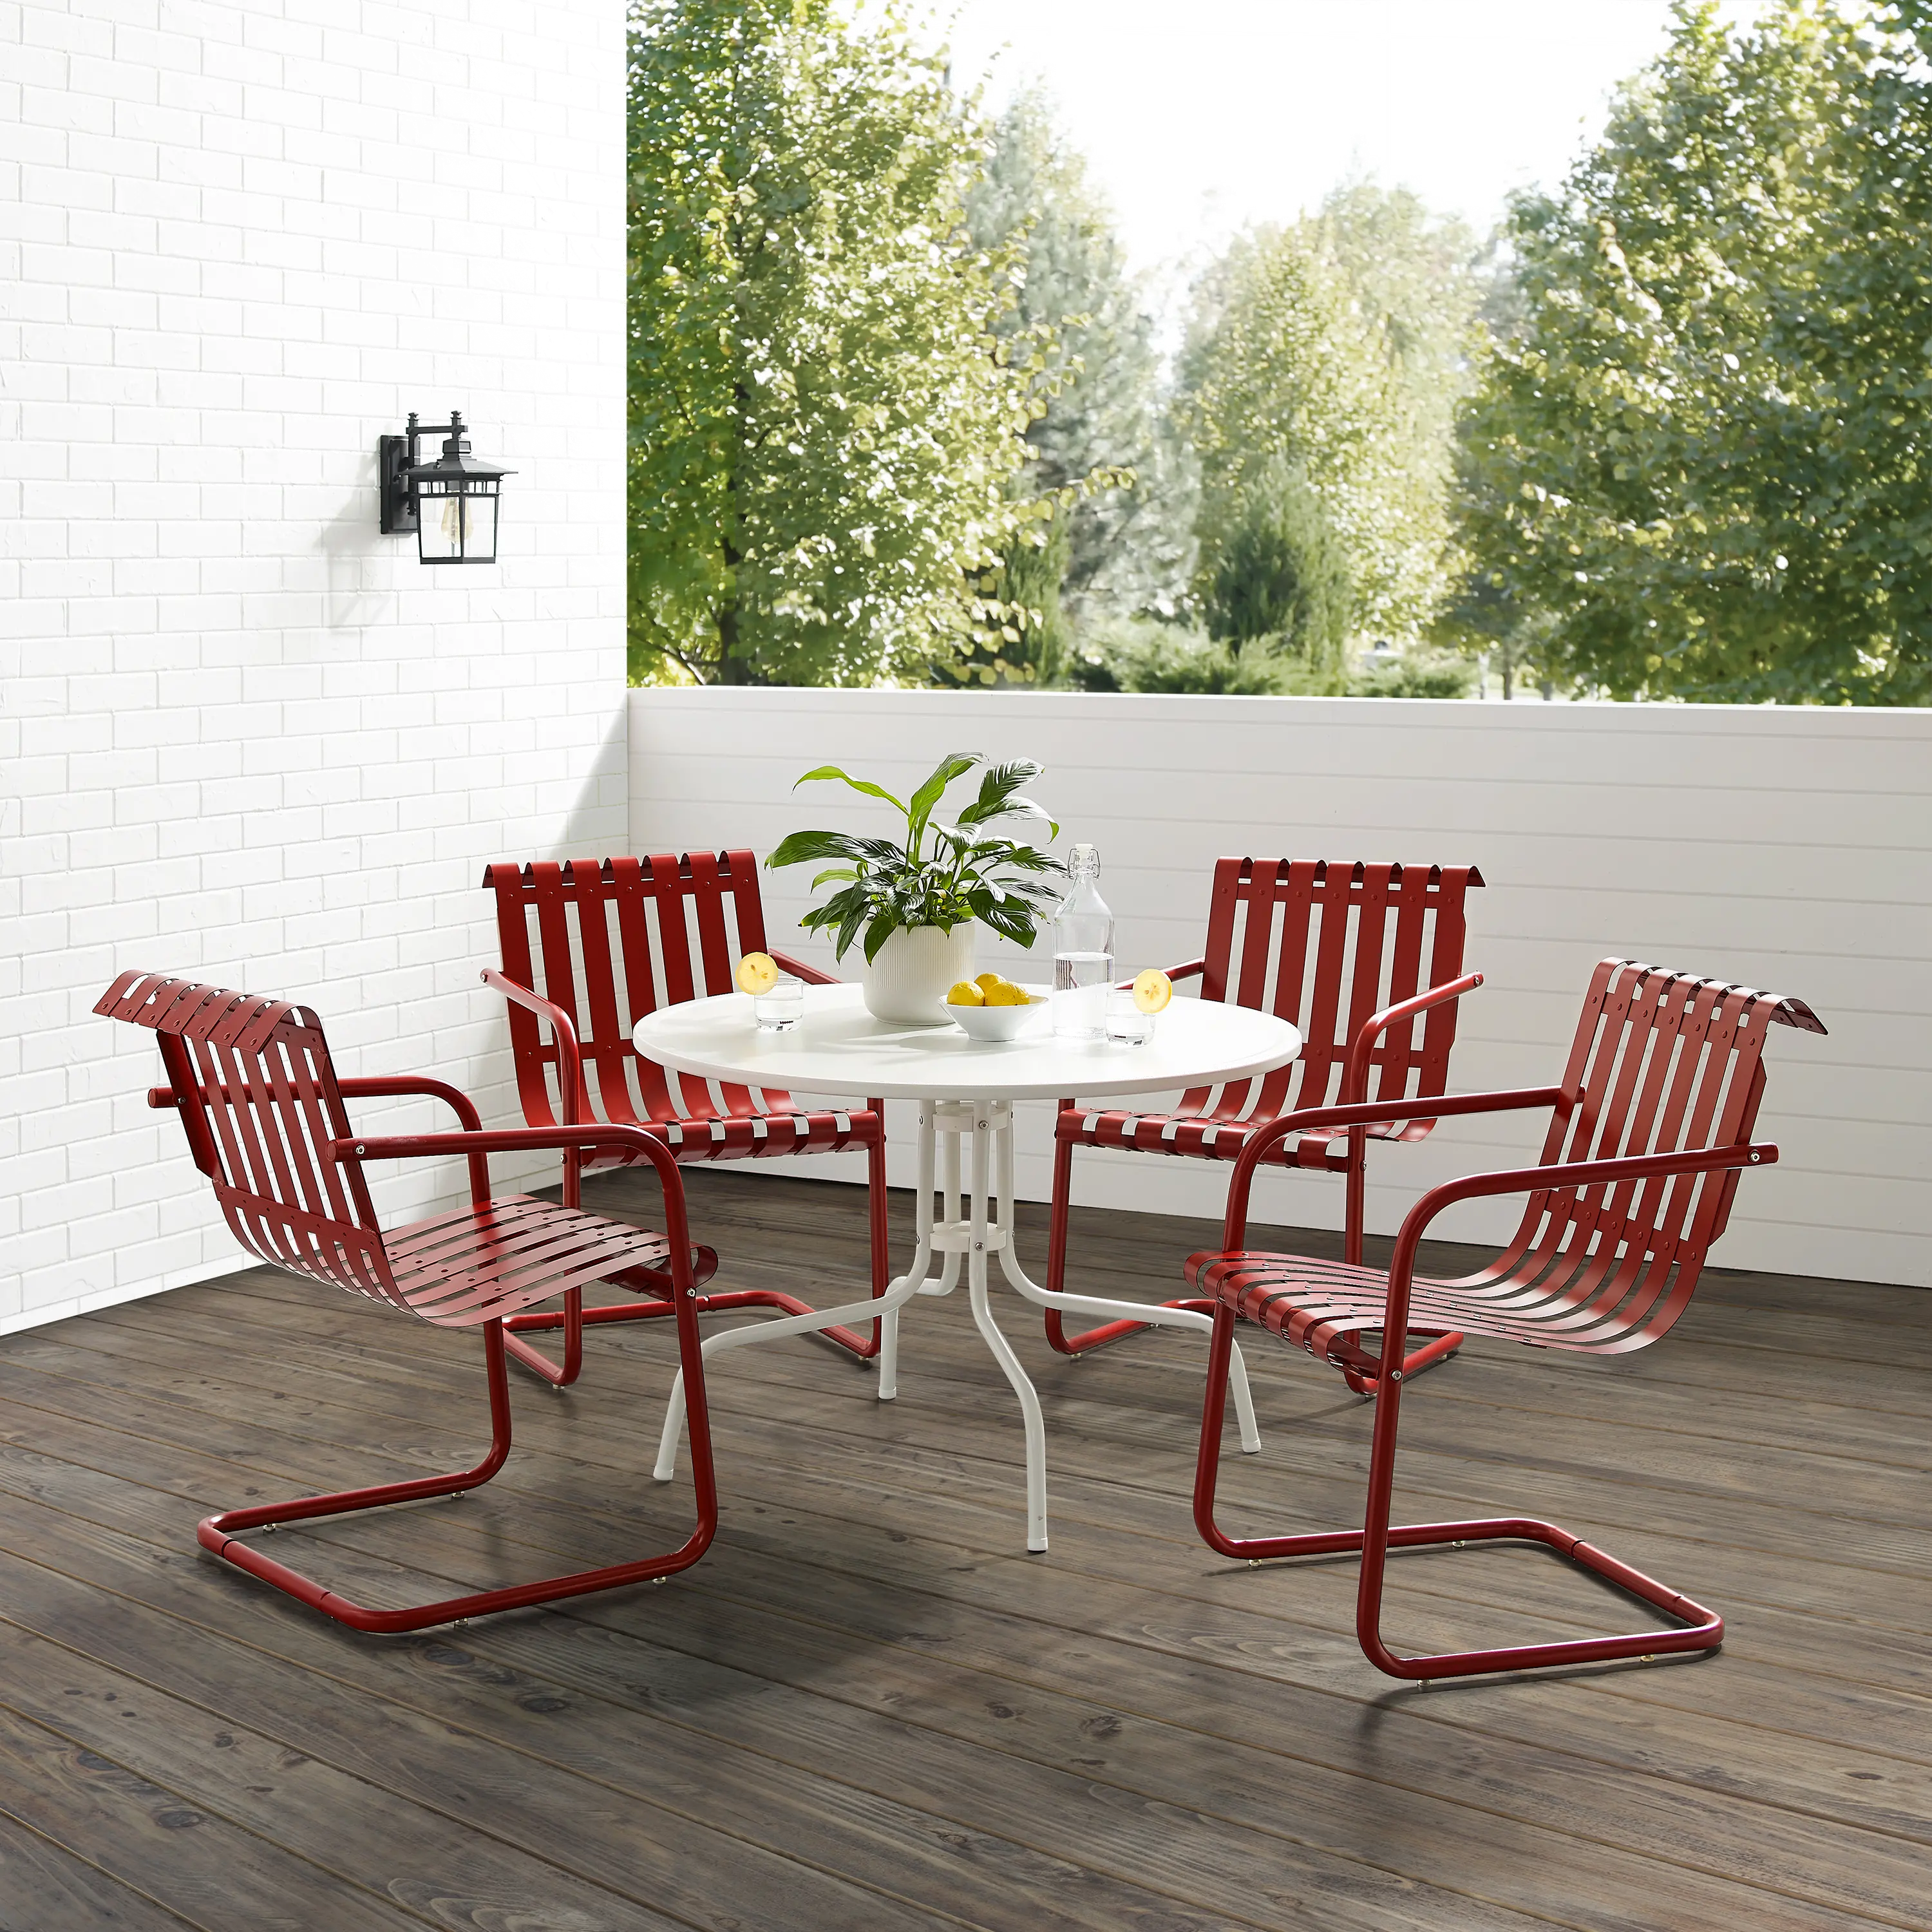 Gracie Red 5 Piece Outdoor Metal Dining Set